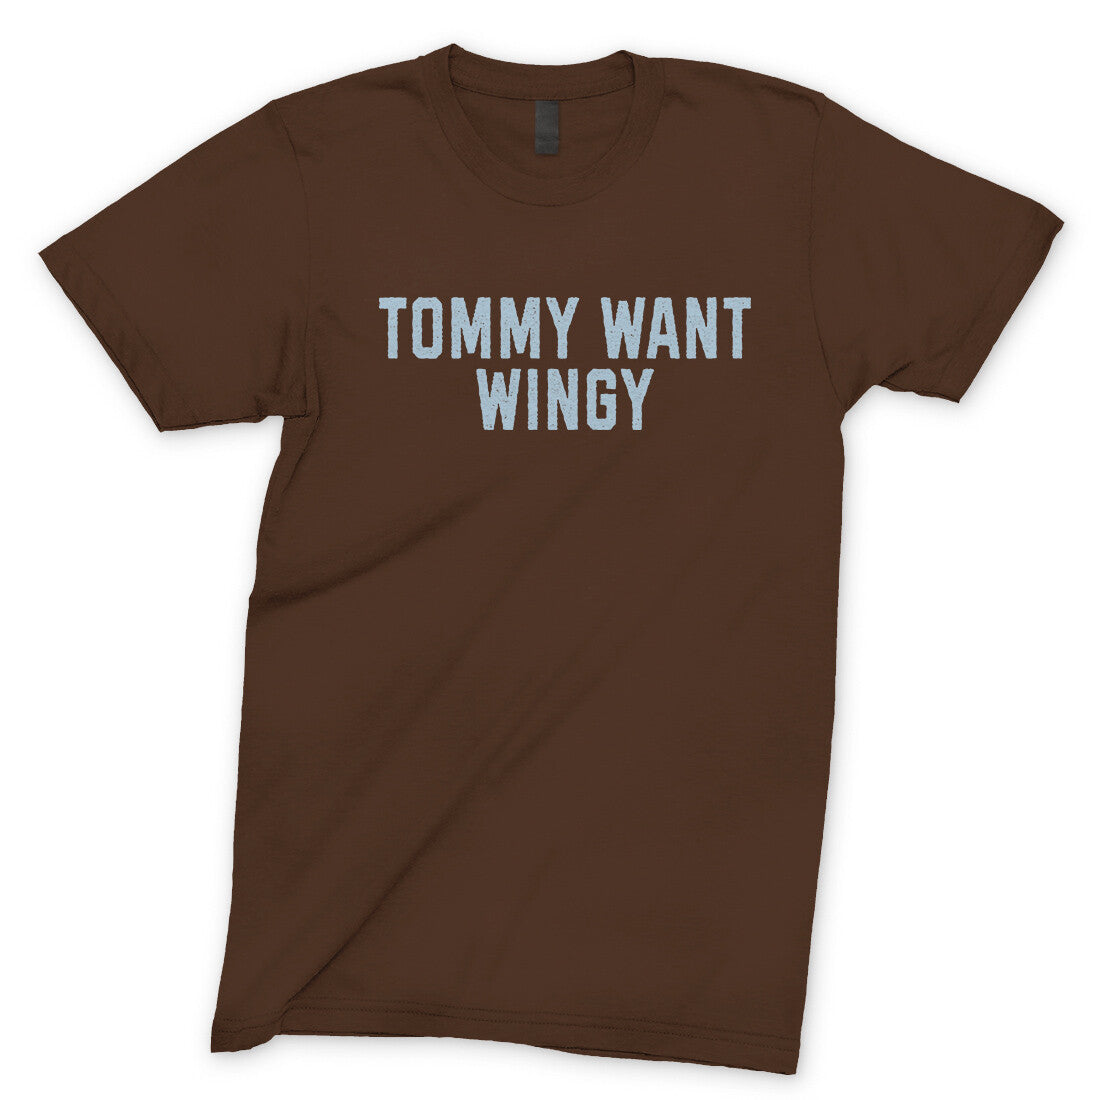 Tommy Want Wingy in Dark Chocolate Color